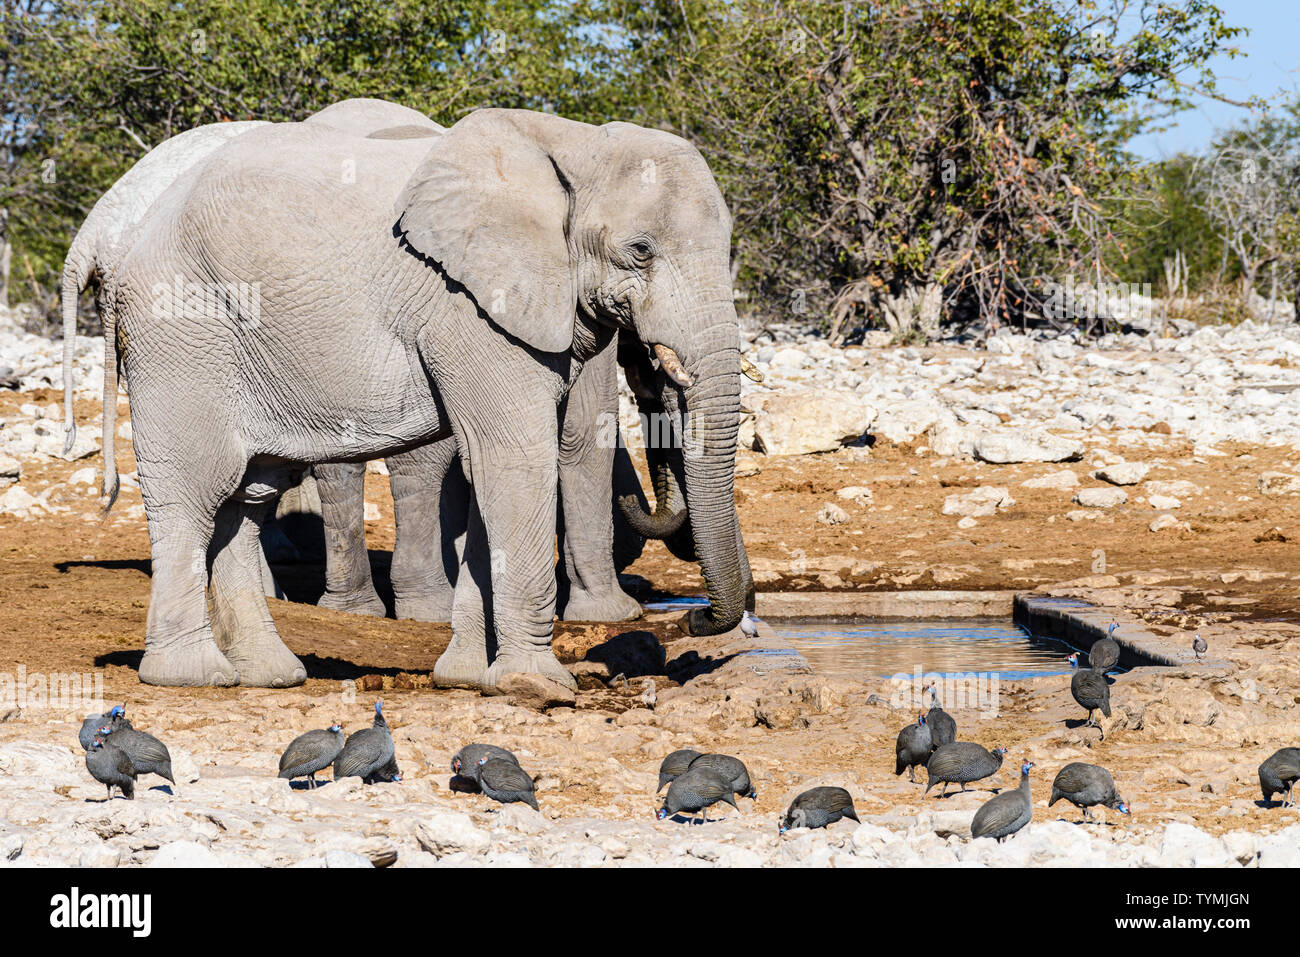 Four African elephants at a water hole in Namibia.  Elephants in Etosha suffer from a lack of phosphor, making their tusks slow growing and brittle. Stock Photo